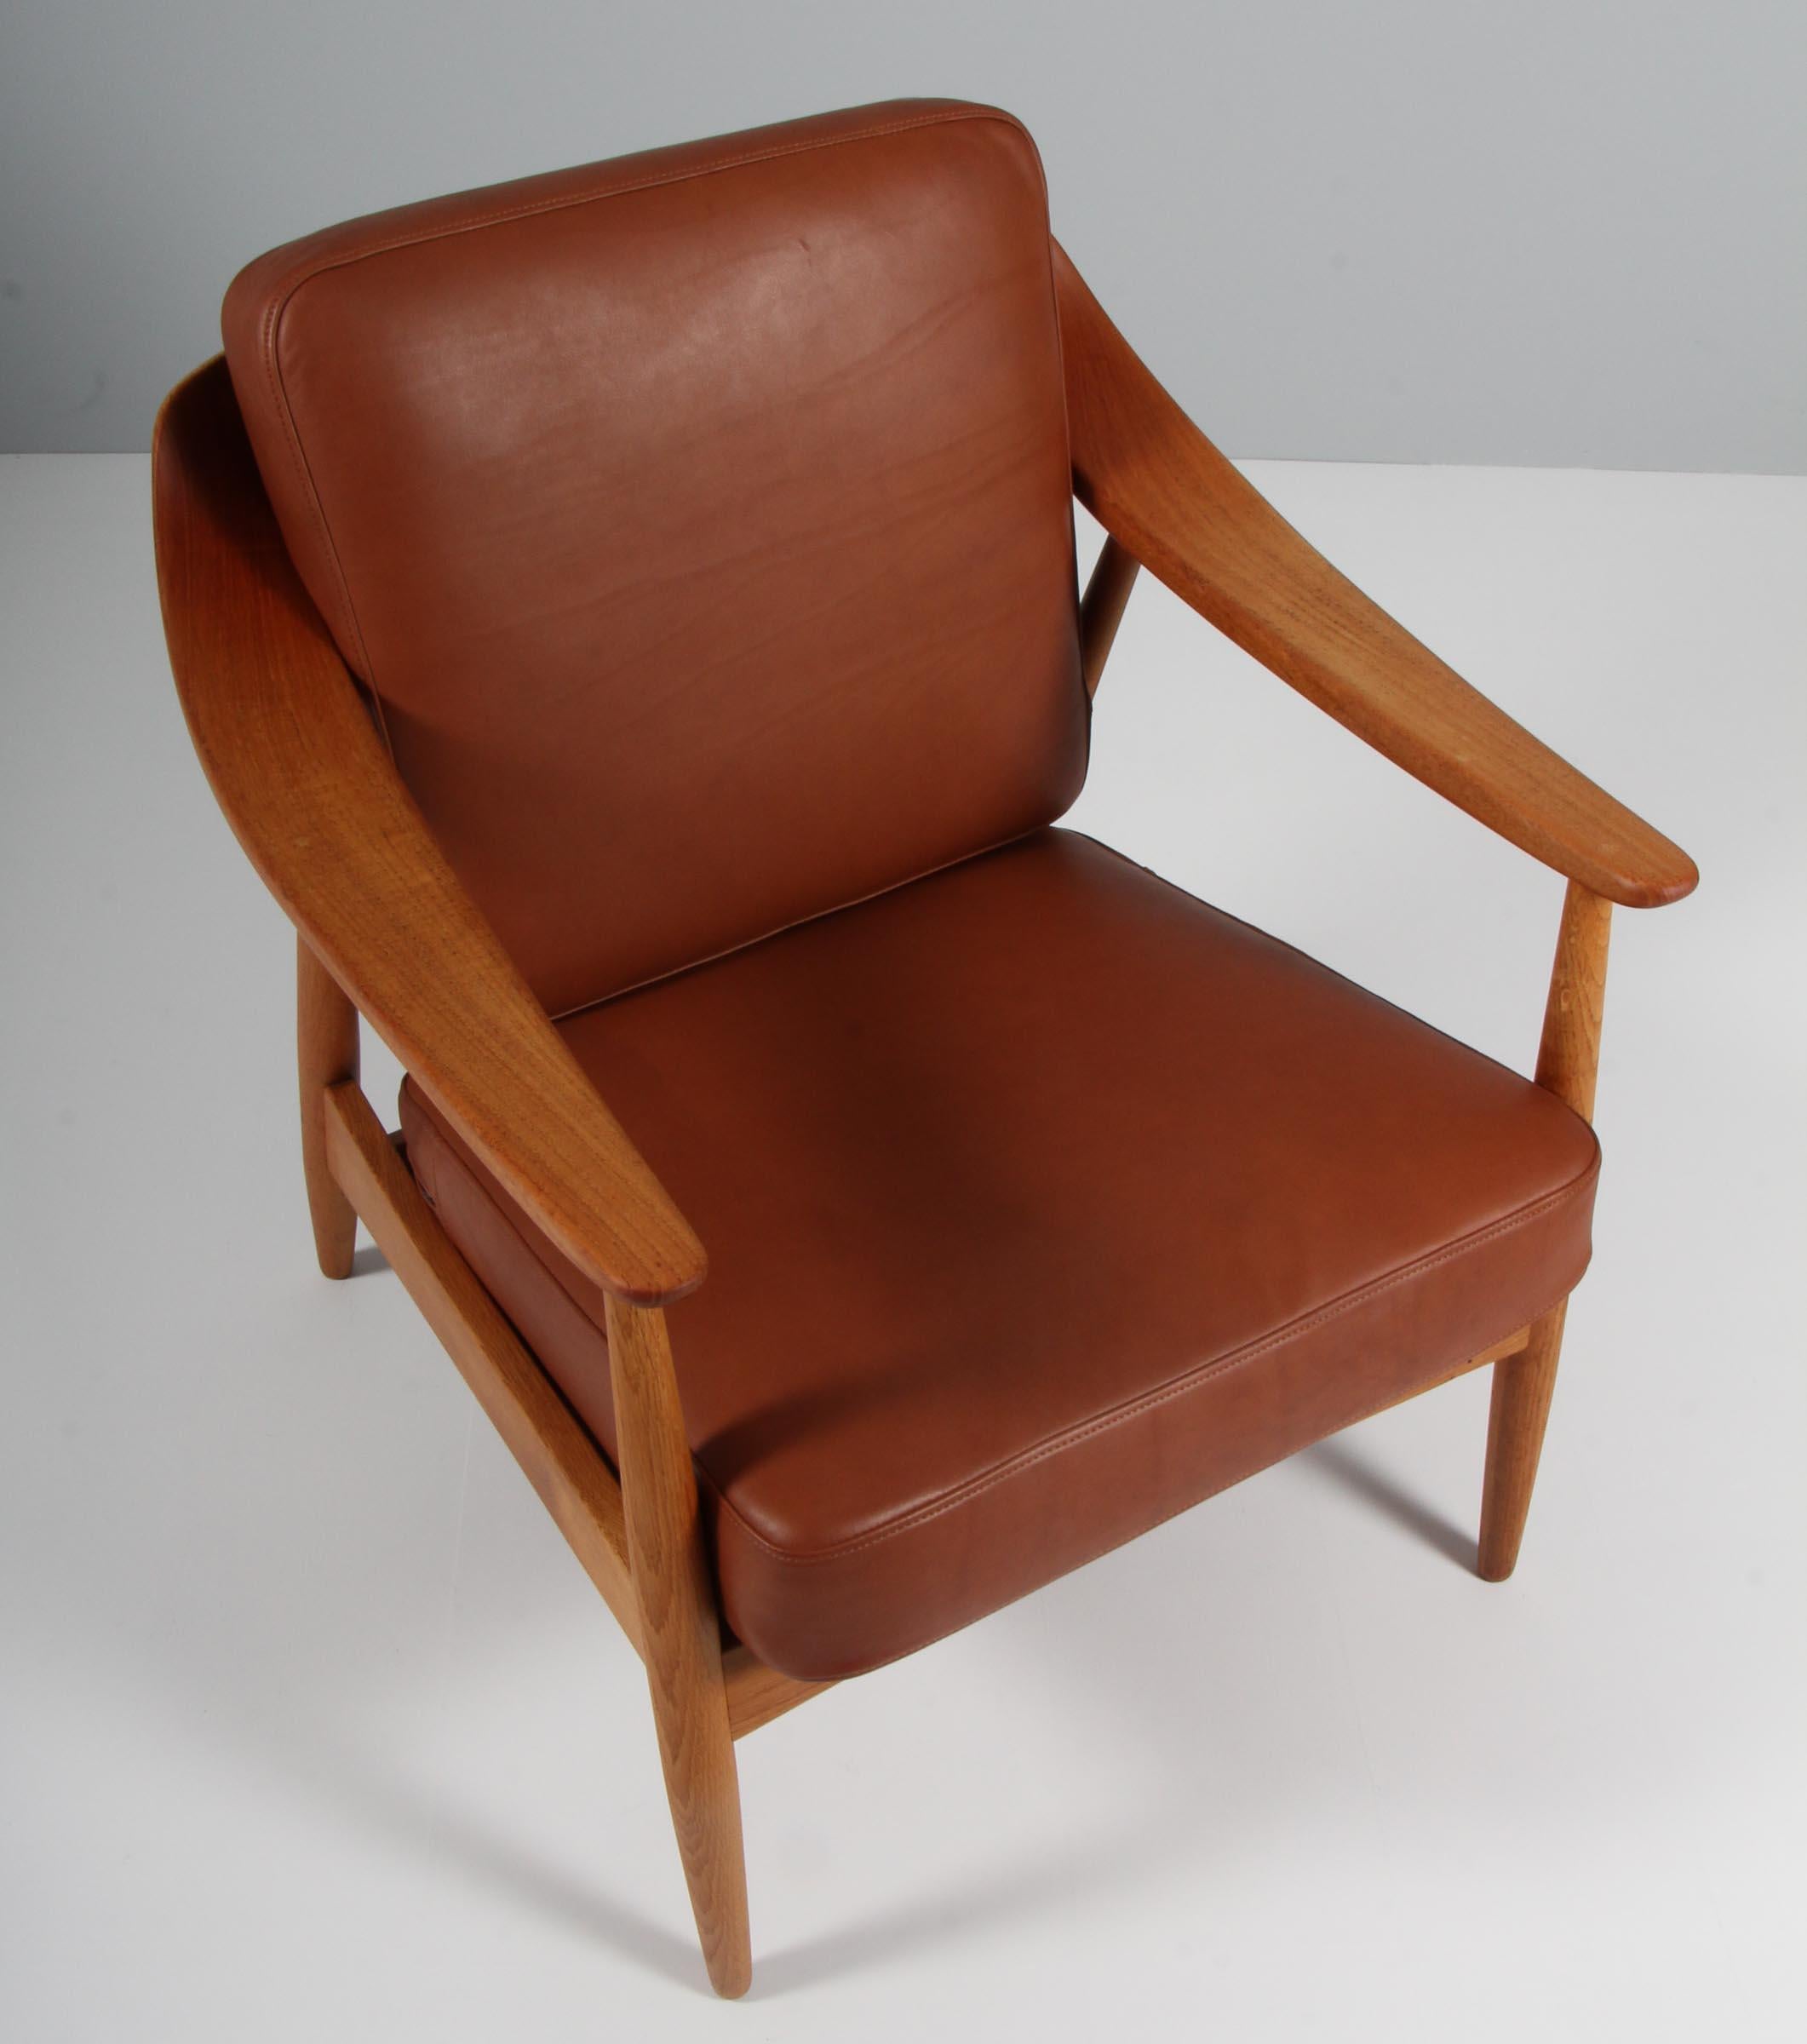 Illum Wikkelsø lounge chair in teak and oak.

New upholstered cushions in tan aniline leather.

Made by Søren Willadsen.